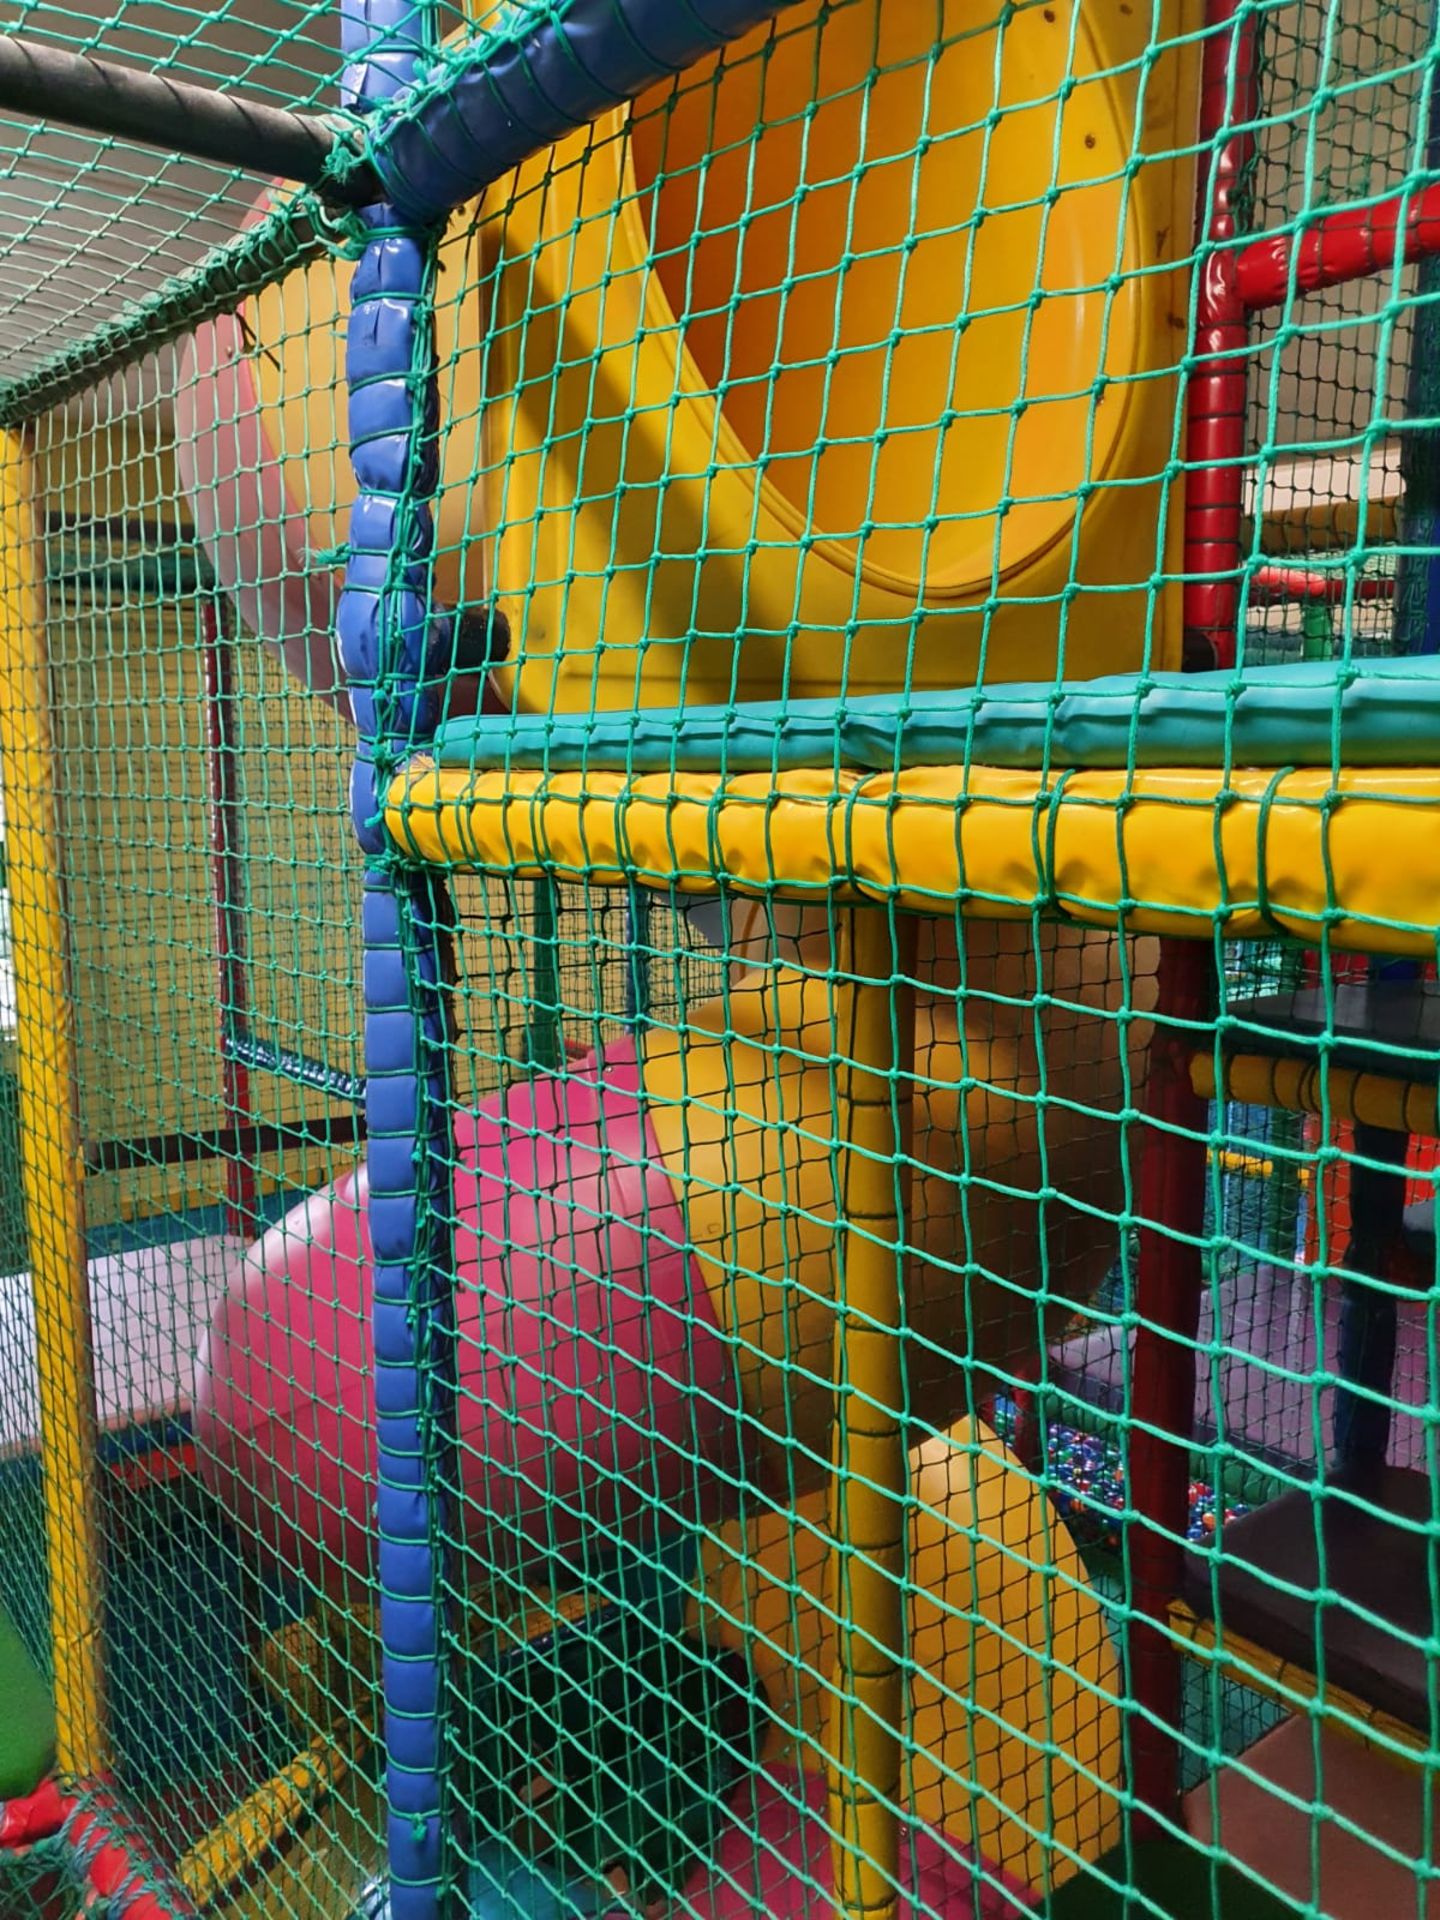 Bramleys Big Adventure Playground - Giant Action-Packed Playcentre With Slides, Zip Line Swings, - Image 108 of 128